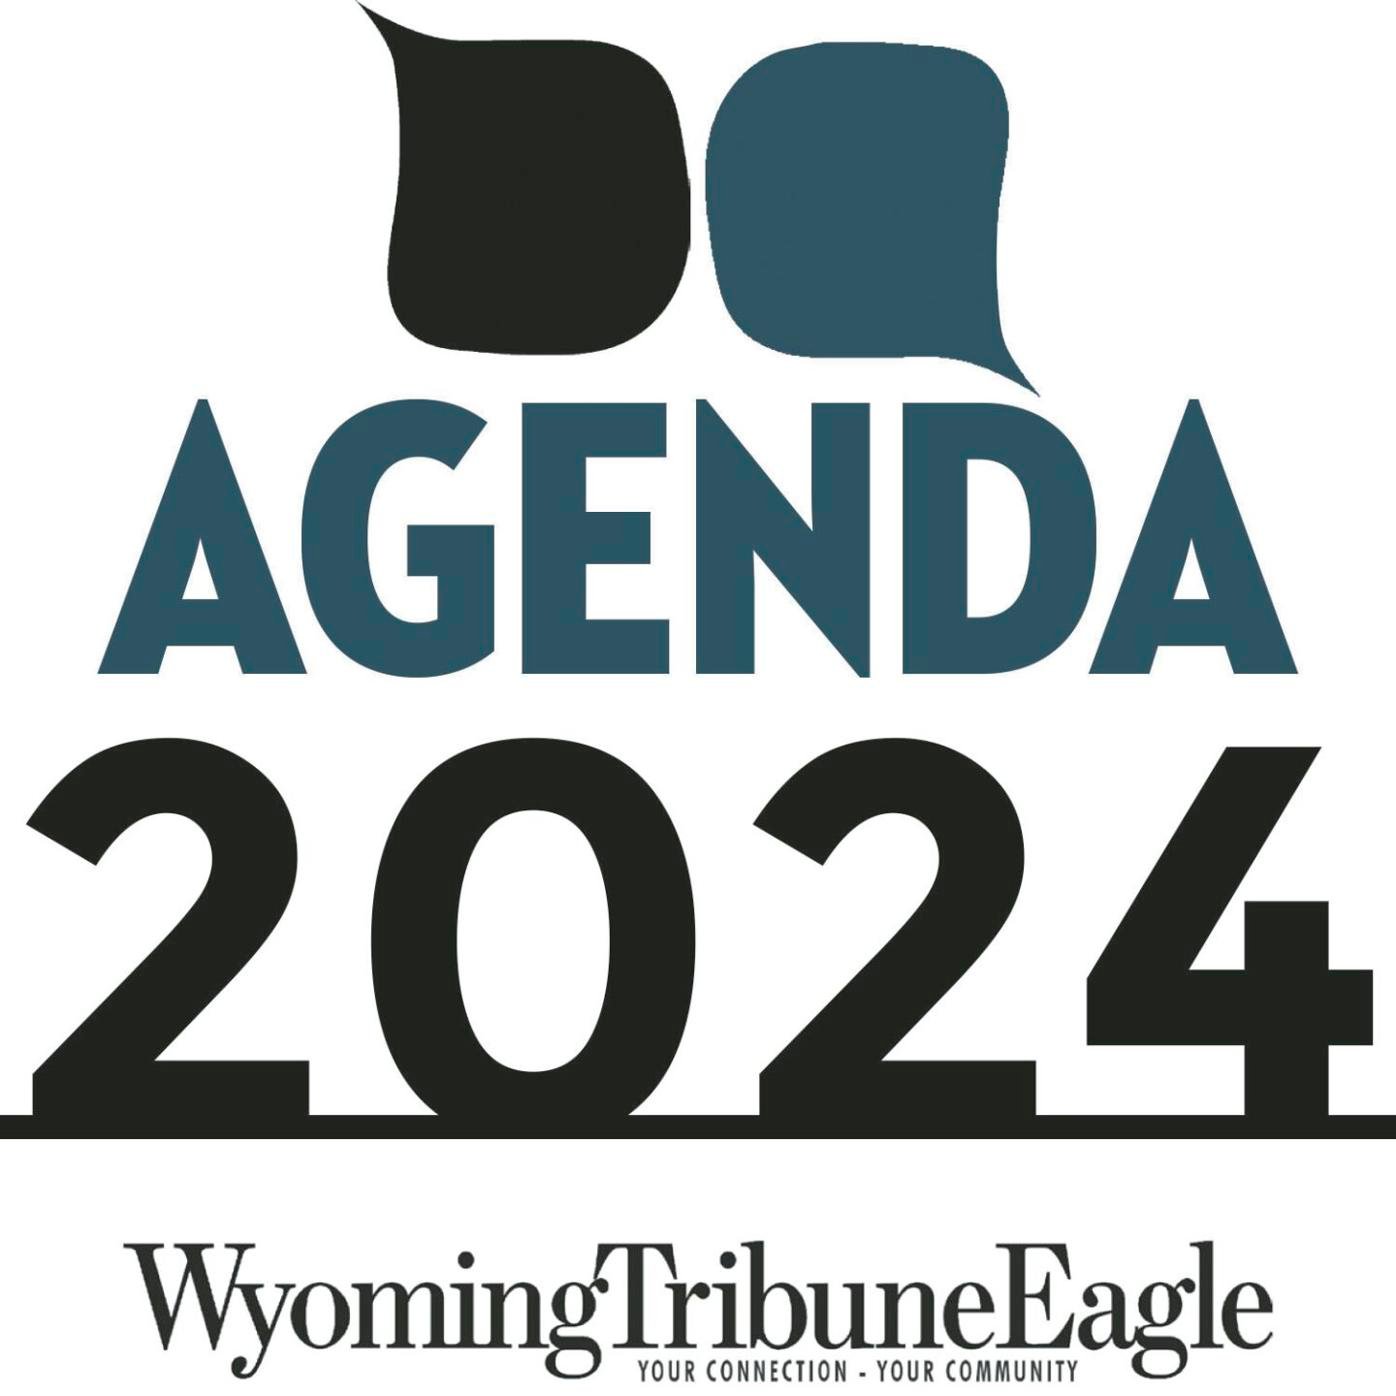 WTE's Agenda 2024 will be more successful with your input